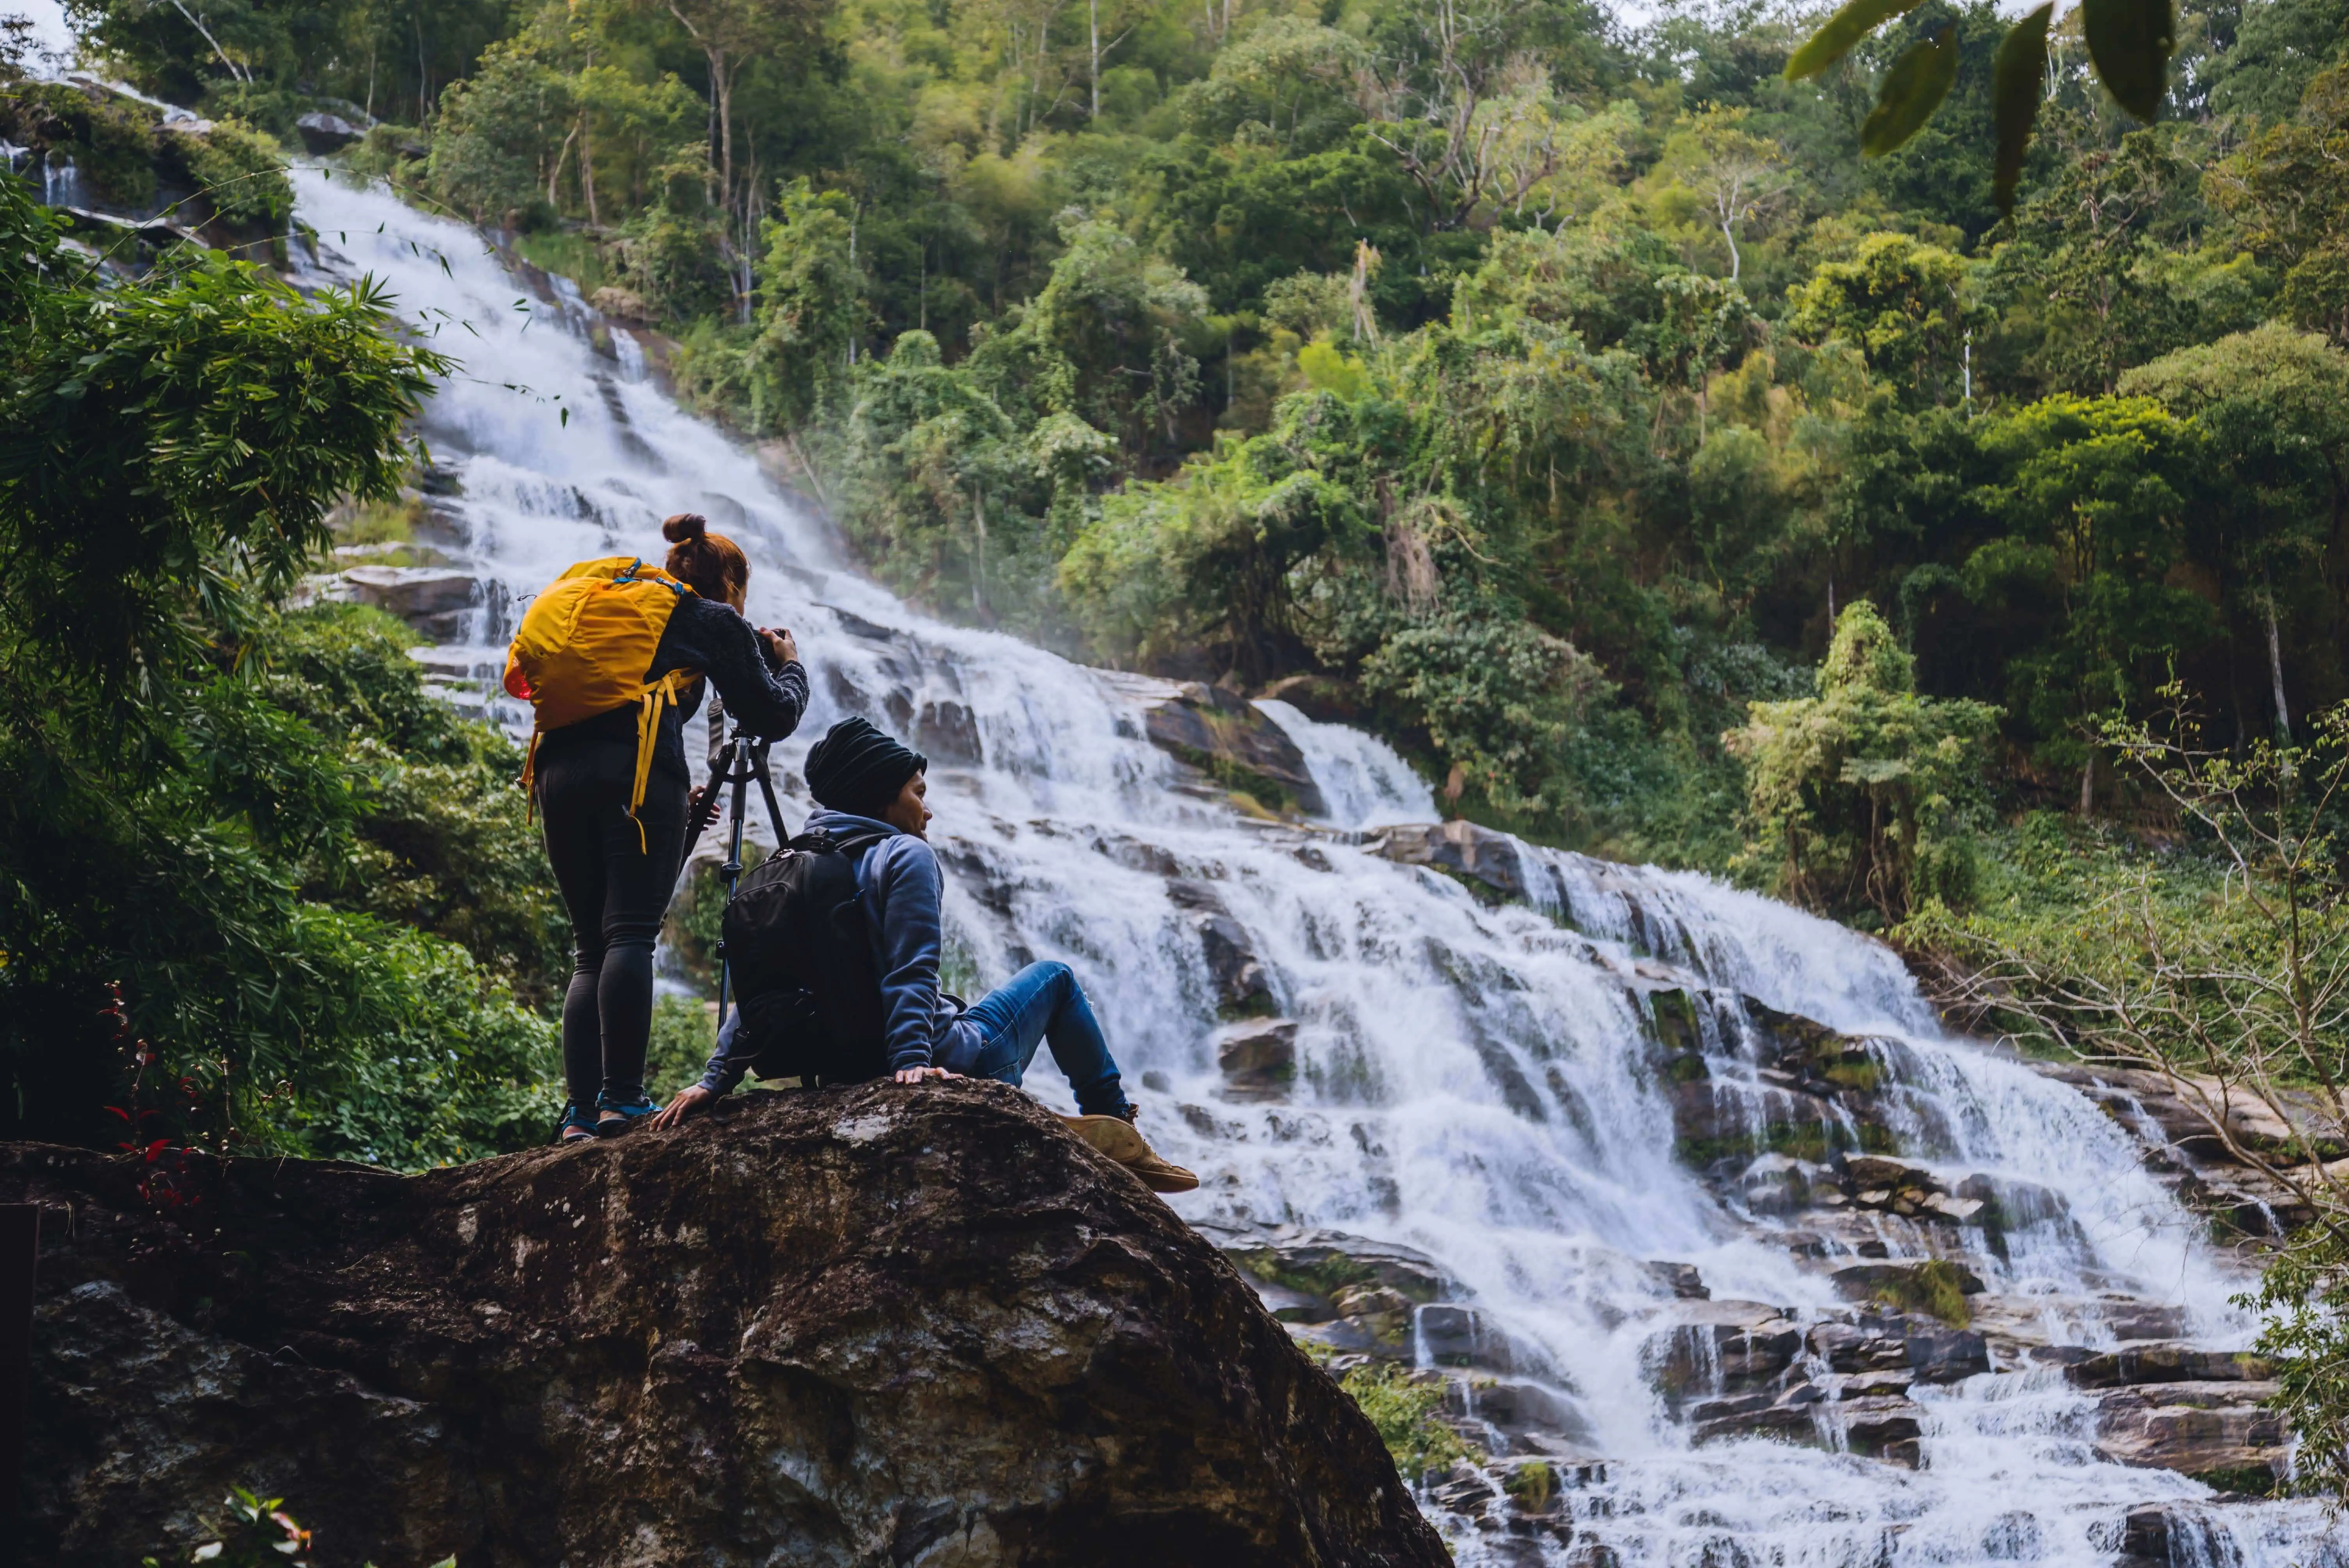 couple photographing nature close to a waterfall